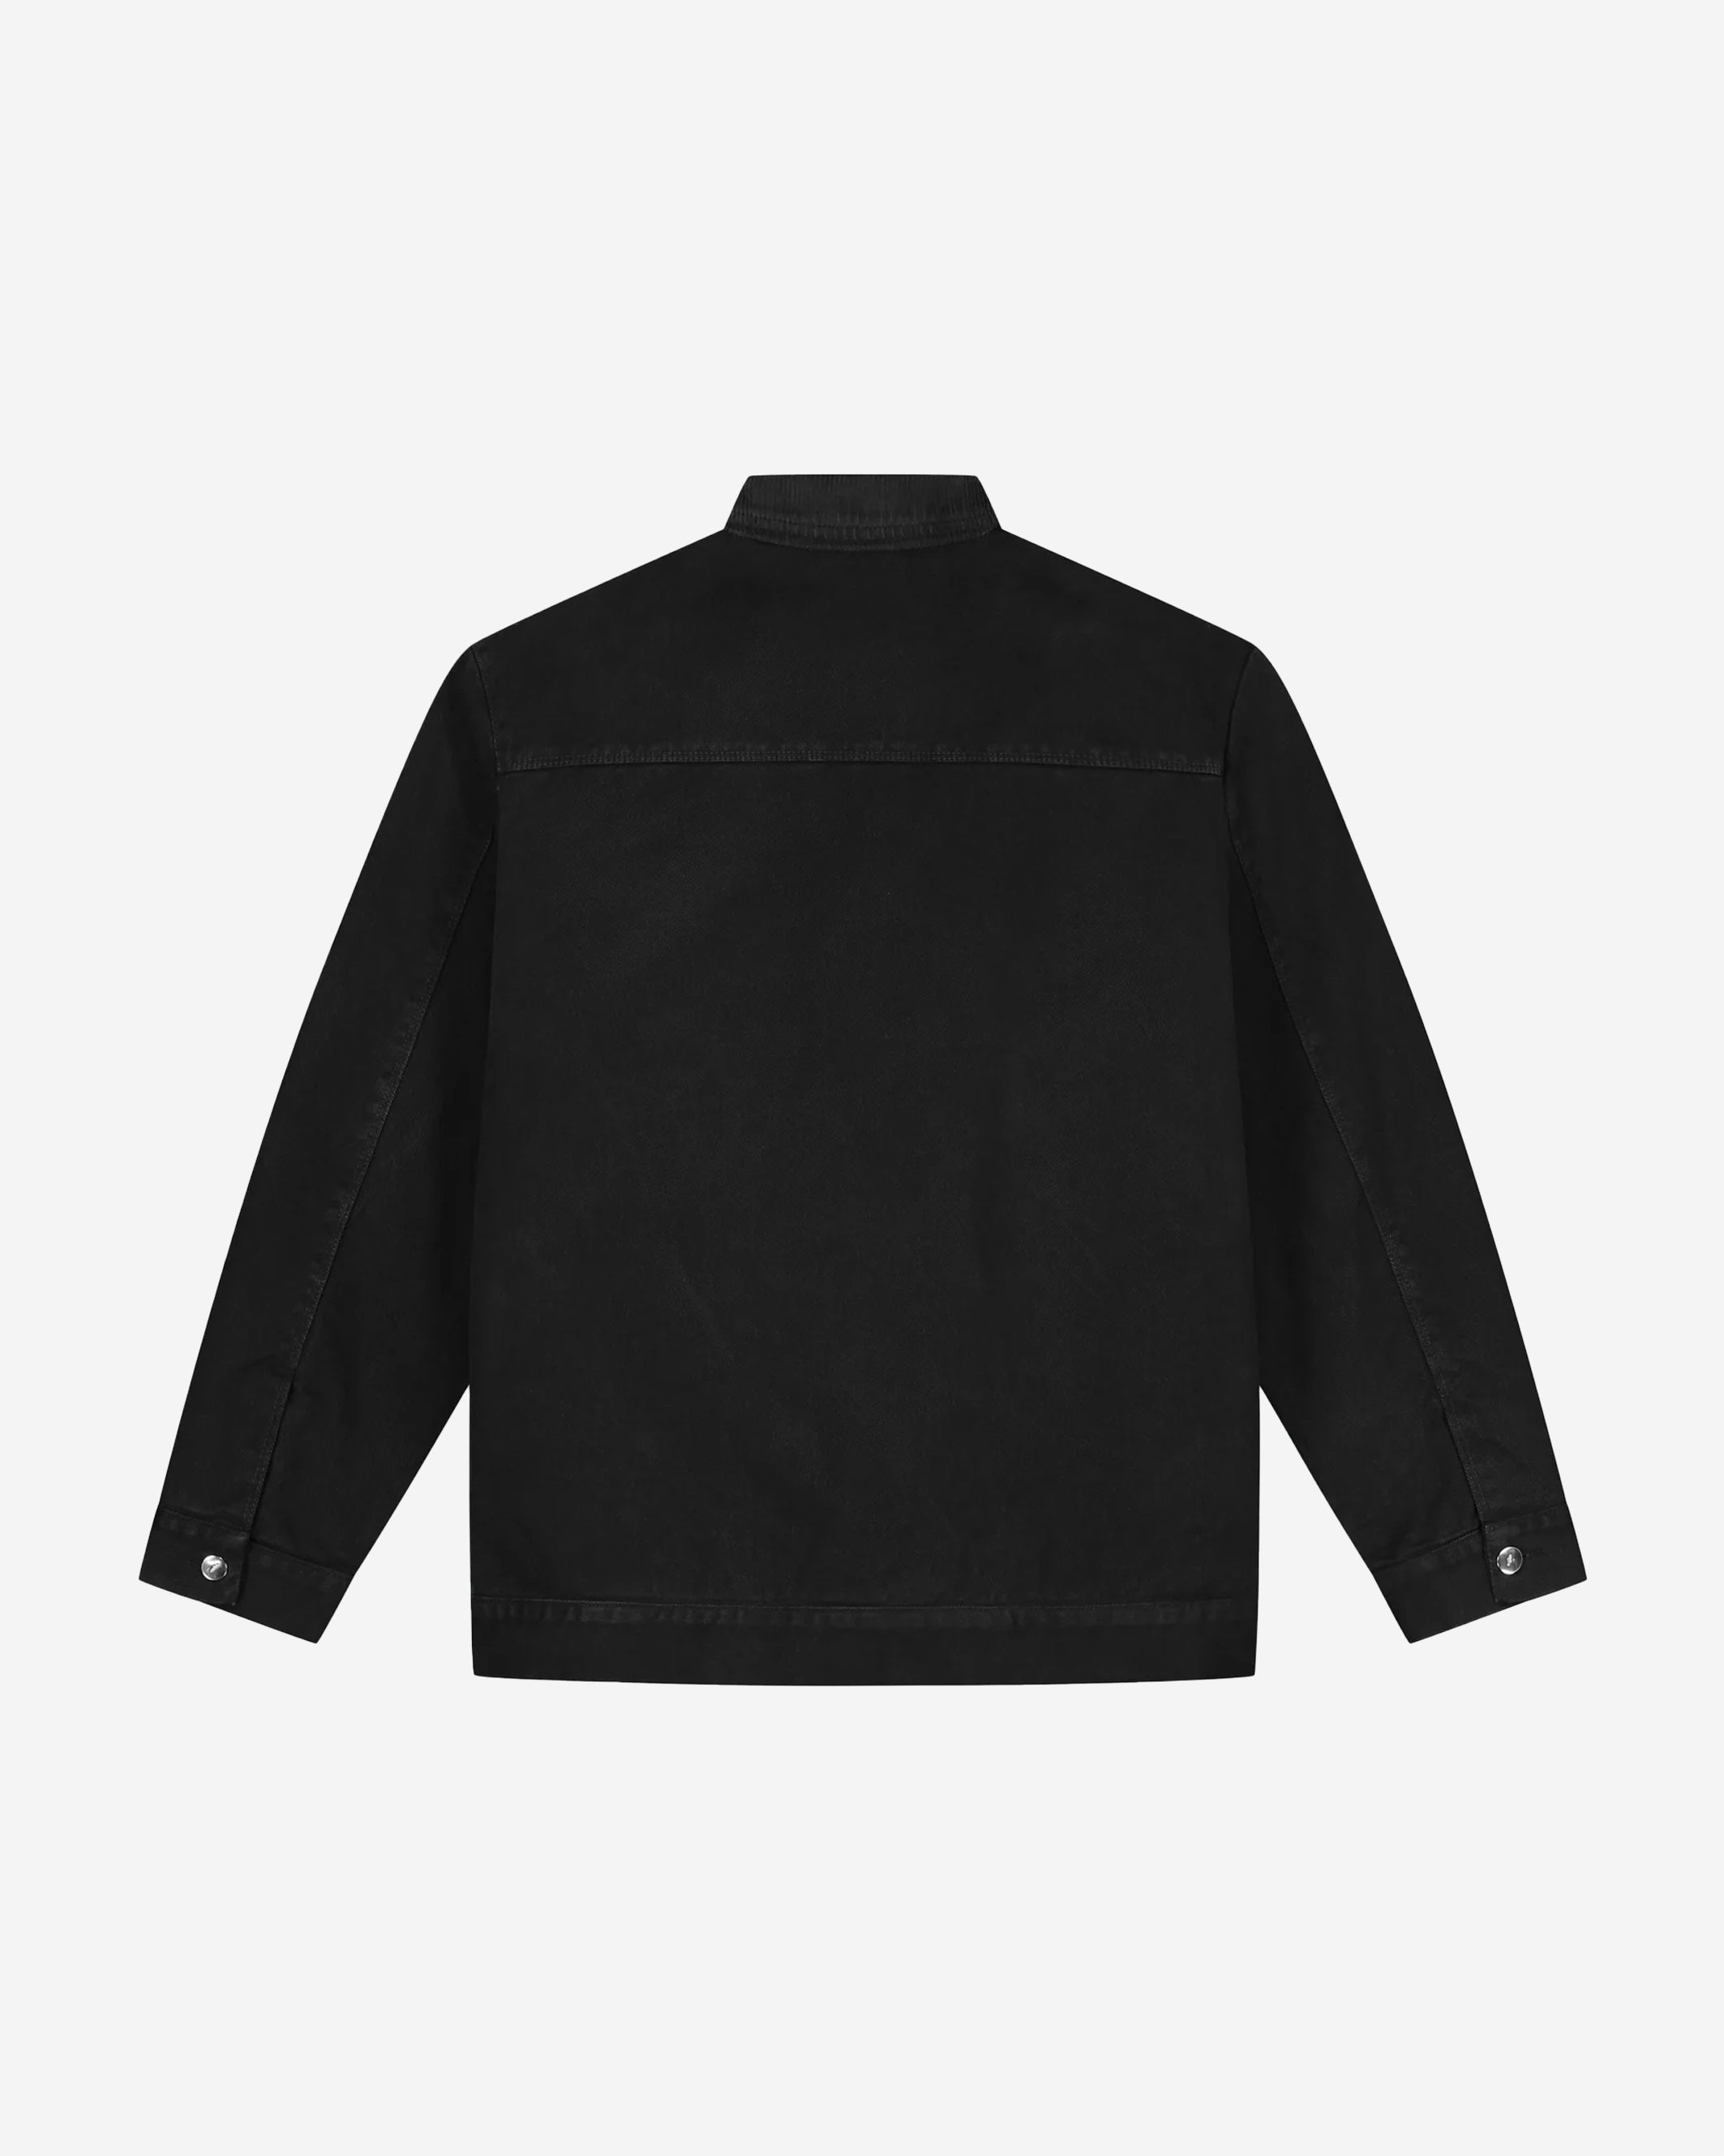 The Jules Workwear Jacket is Arte's take on a classic workwear-style jacket in all black. Its utilitarian aesthetic is defined by its front paneling reminiscent of traditional work jackets. The front panel comes in a tonal corduroy fabric, giving the jacket a different feeling of texture. Made from premium denim, the jacket features four open pockets and full-length button closure.